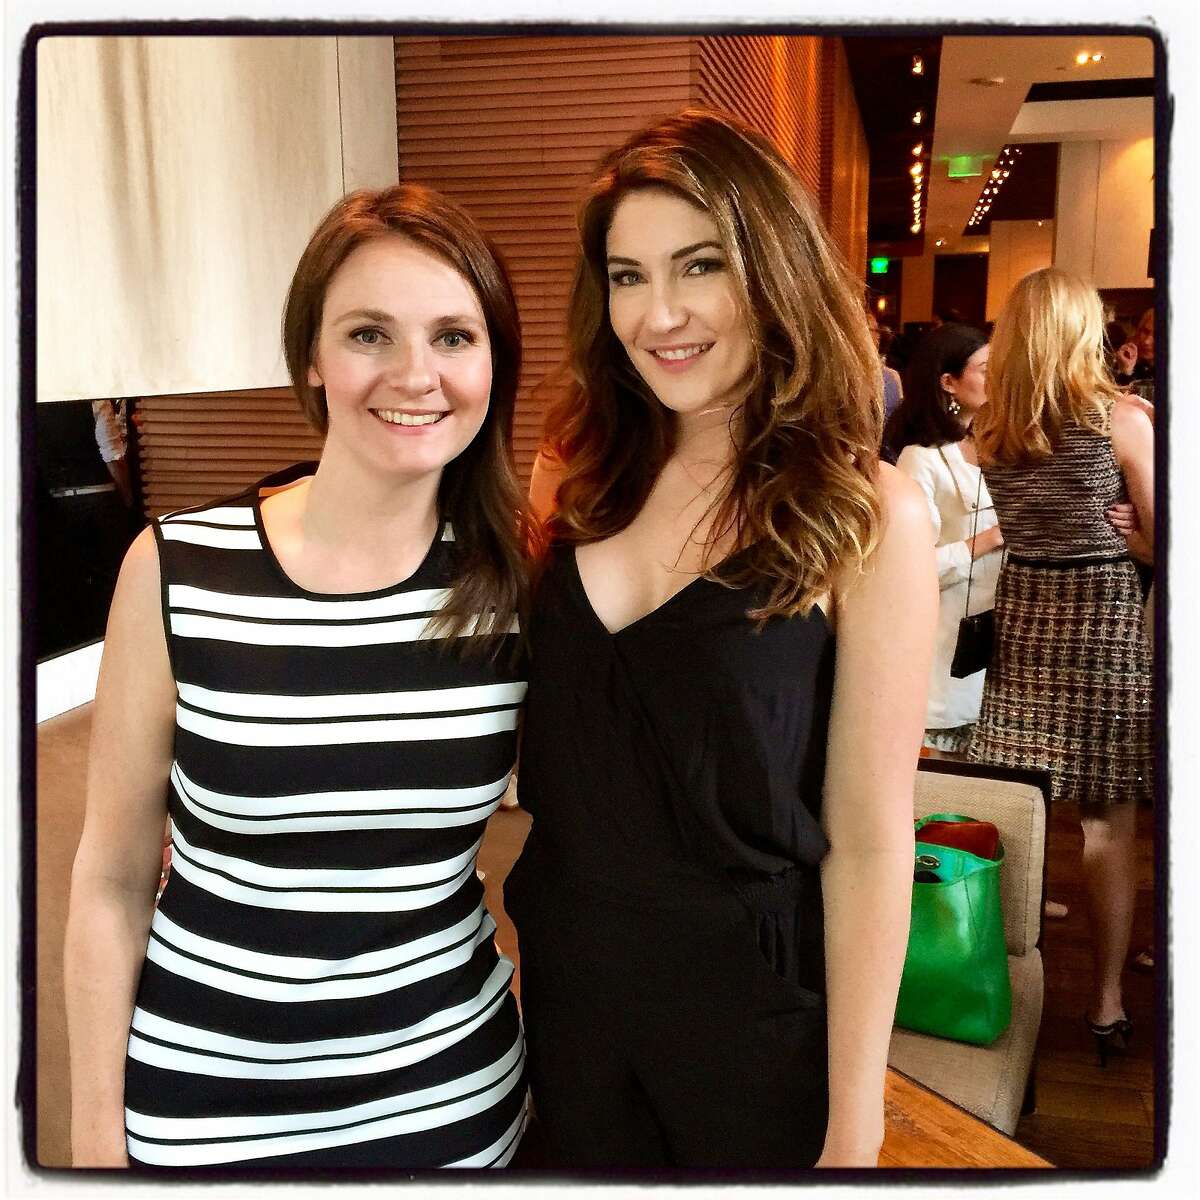 CloudFare co-founder Michelle Zatlyn (left) and StyleSeat founder & CEO Melody McCloskey at the Elle Women in Tech dinner at Prospect Restaurant. June 2015. By Catherine Bigelow.